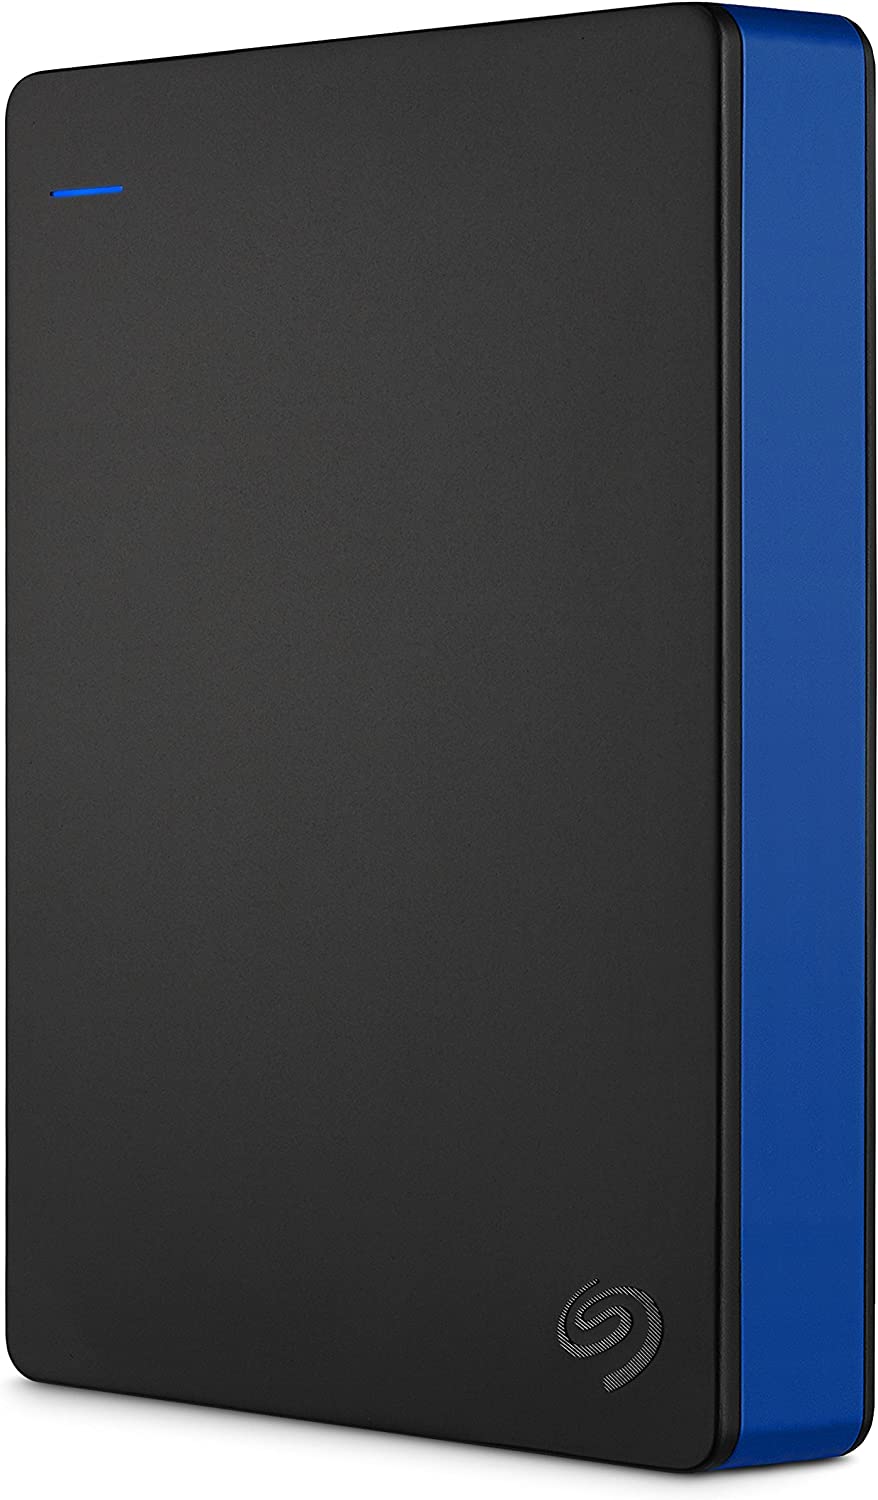 Disque Dur Externe 4 To Gaming PS4 Seagate